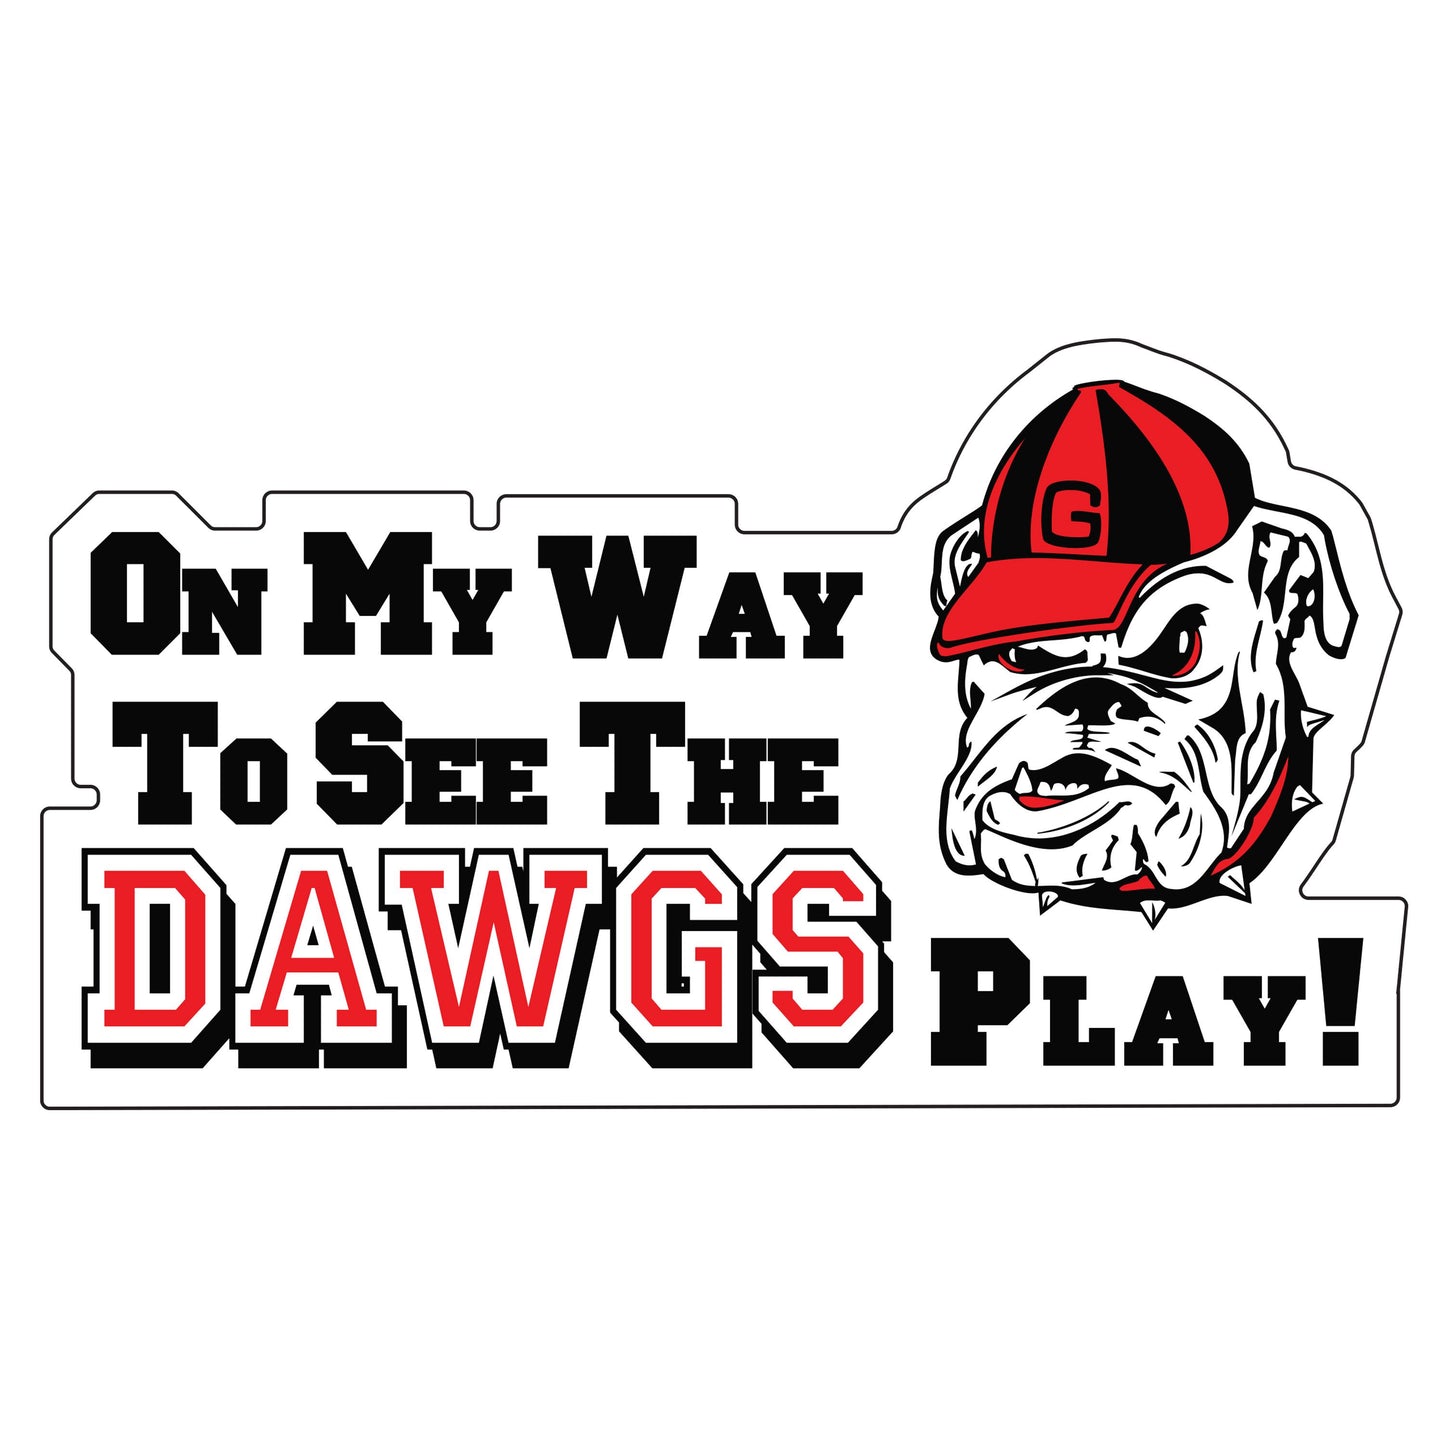 Craftique On My Way to see the Dawgs play! Car Magnet